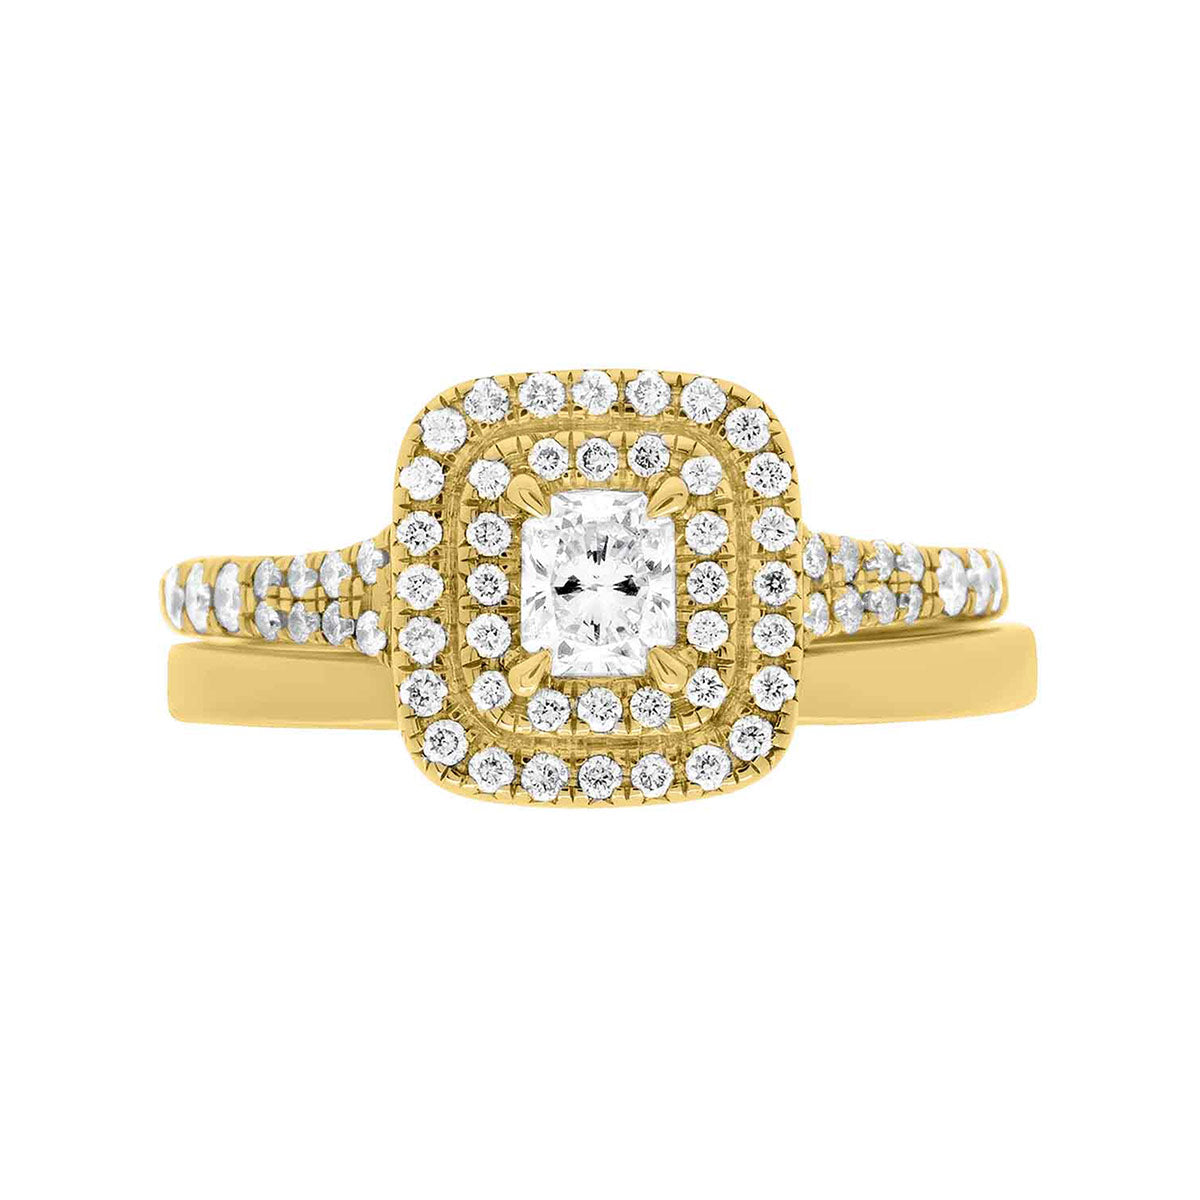 Double Halo Cushion Cut Diamond Ring in yellow gold pictured with a matching gold wedding ring